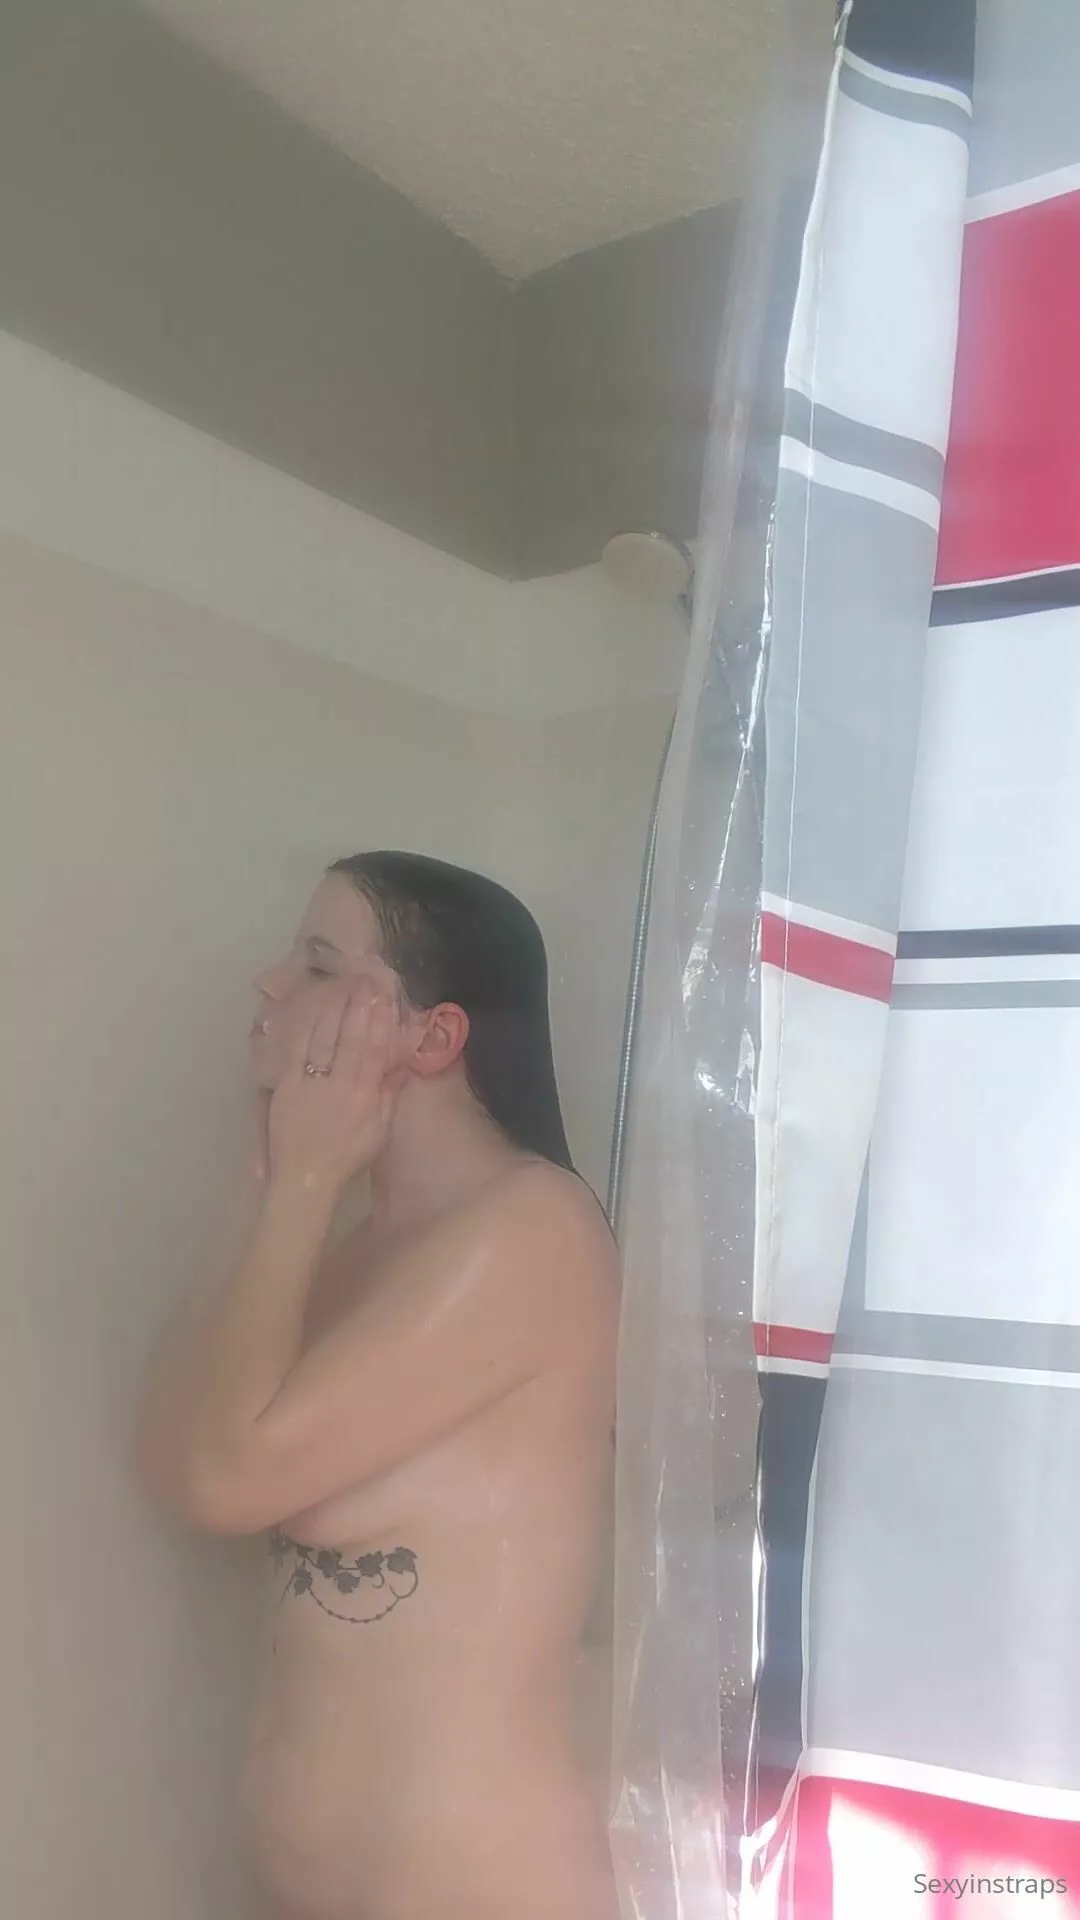 Sexyinstraps come watch me shower peeping tom voyeur style xxx onlyfans porn videos photo